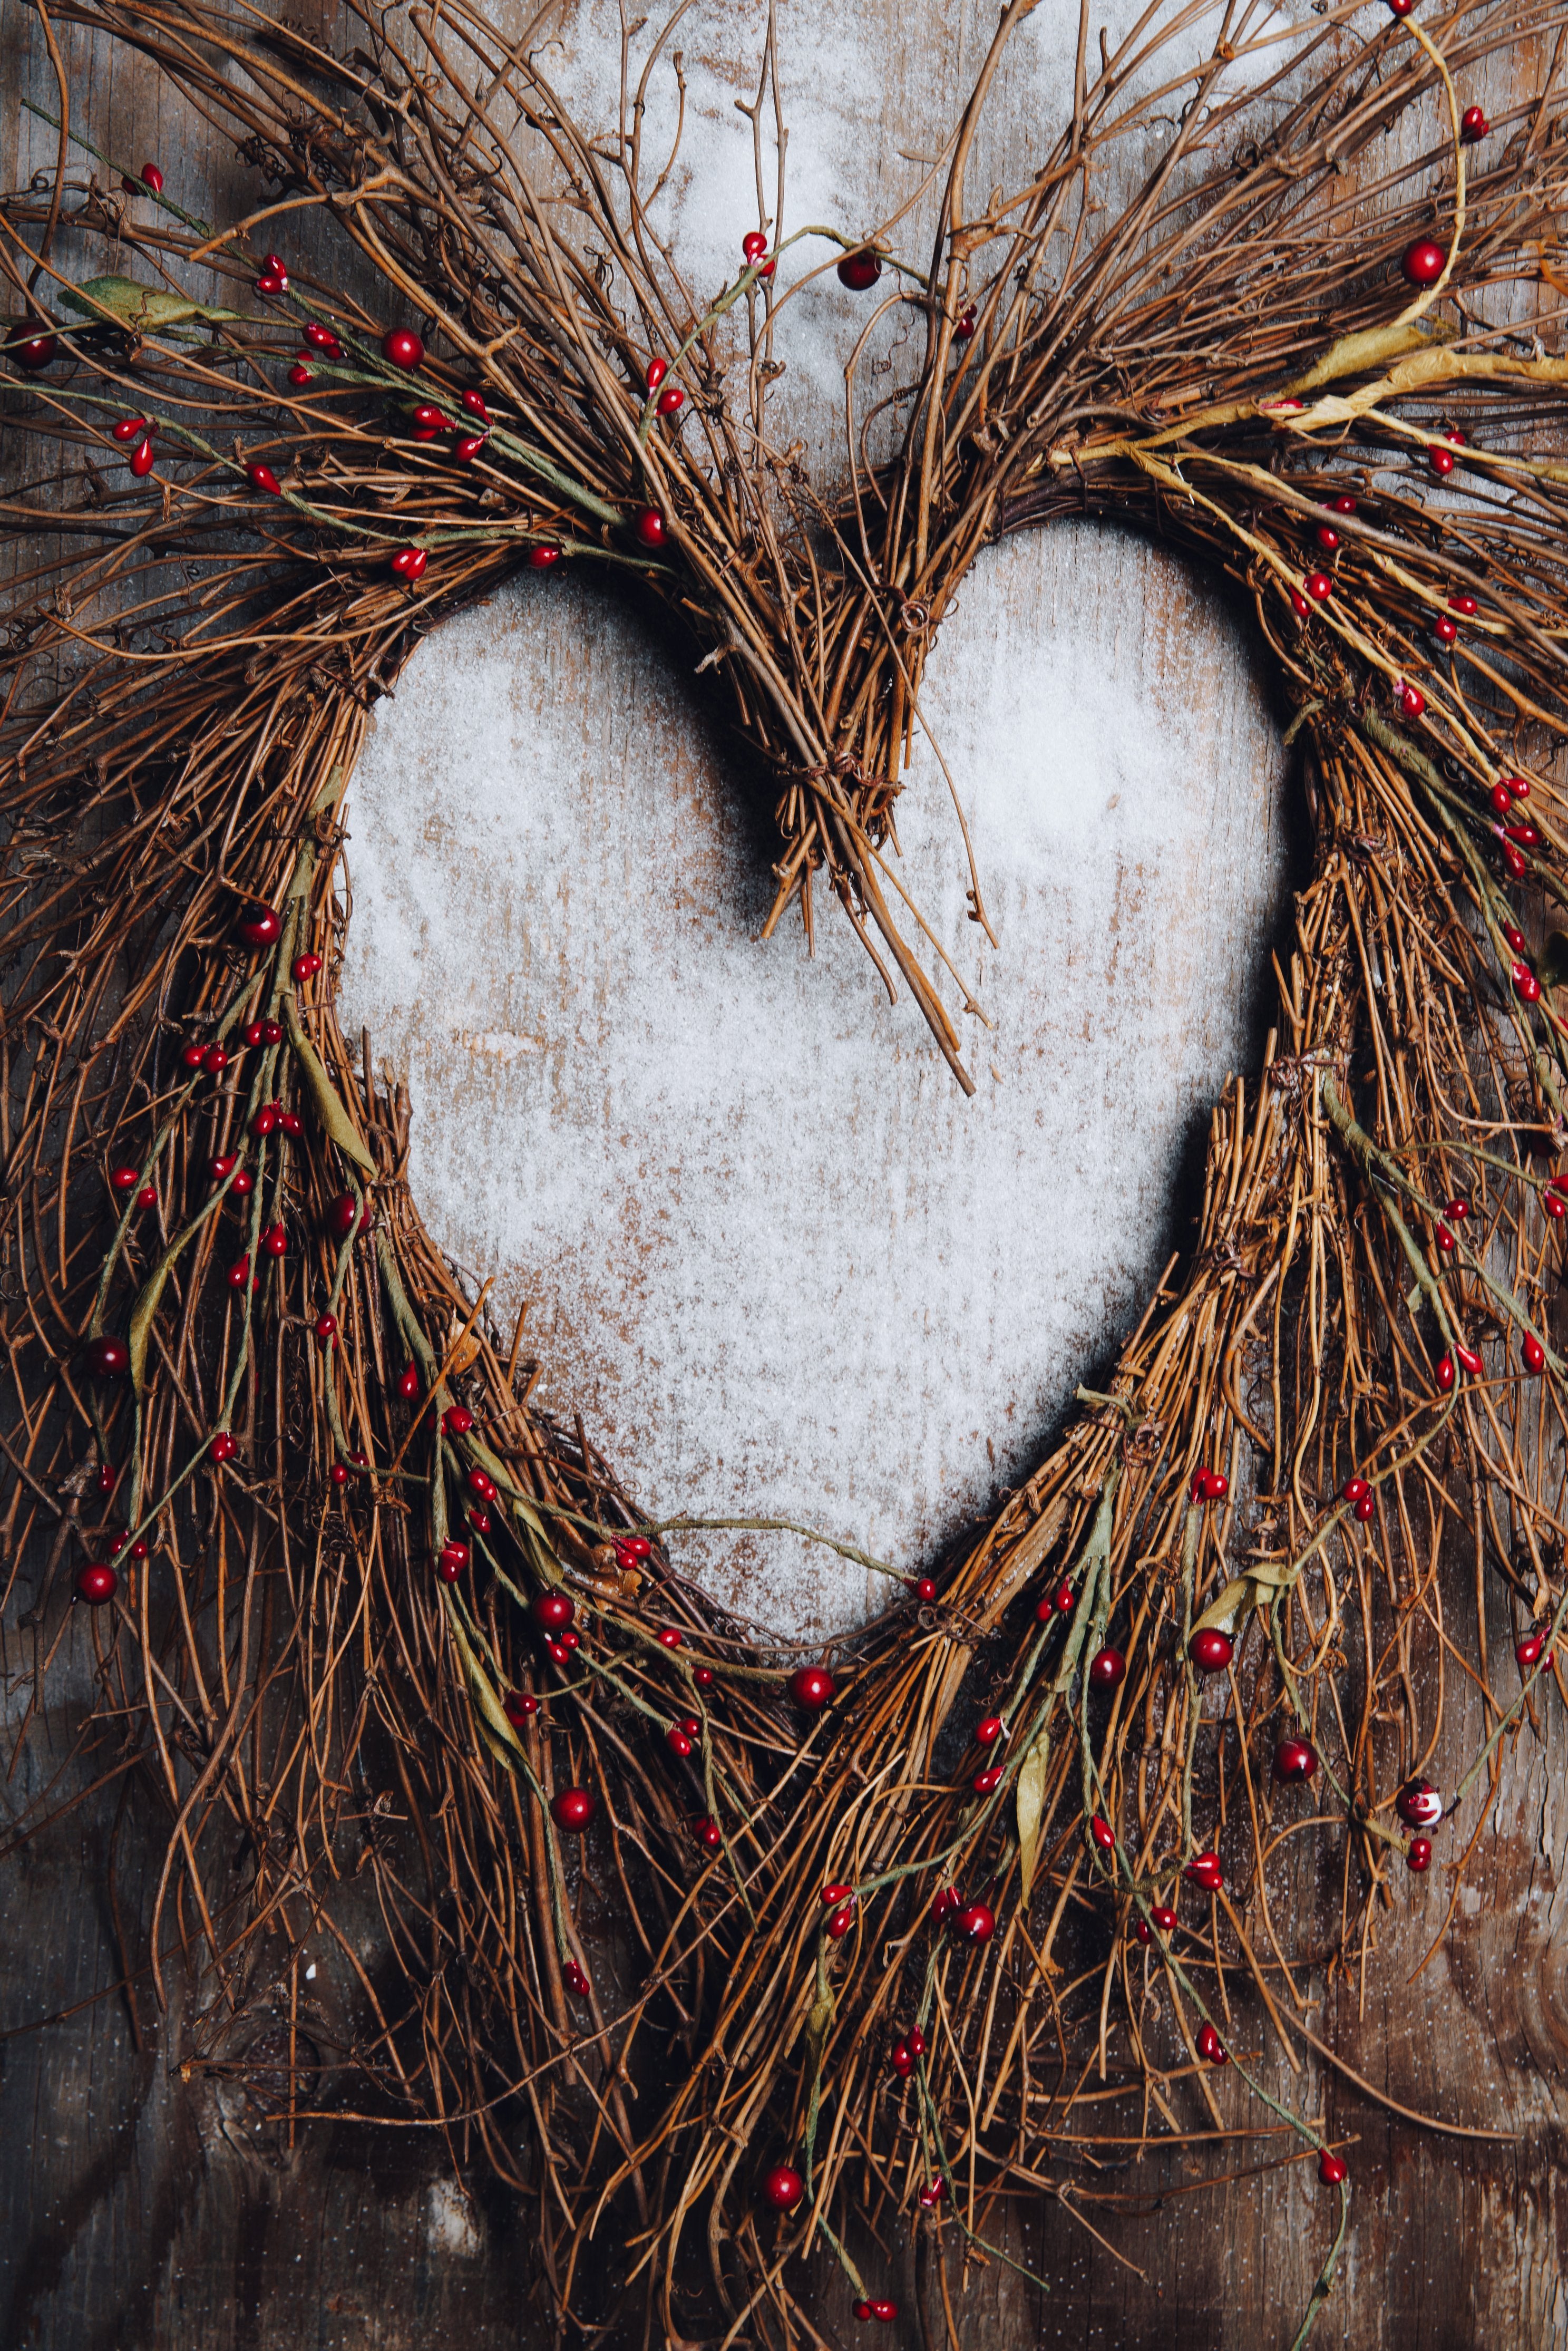 A wreath of twigs and natural materials in the shape of a heart